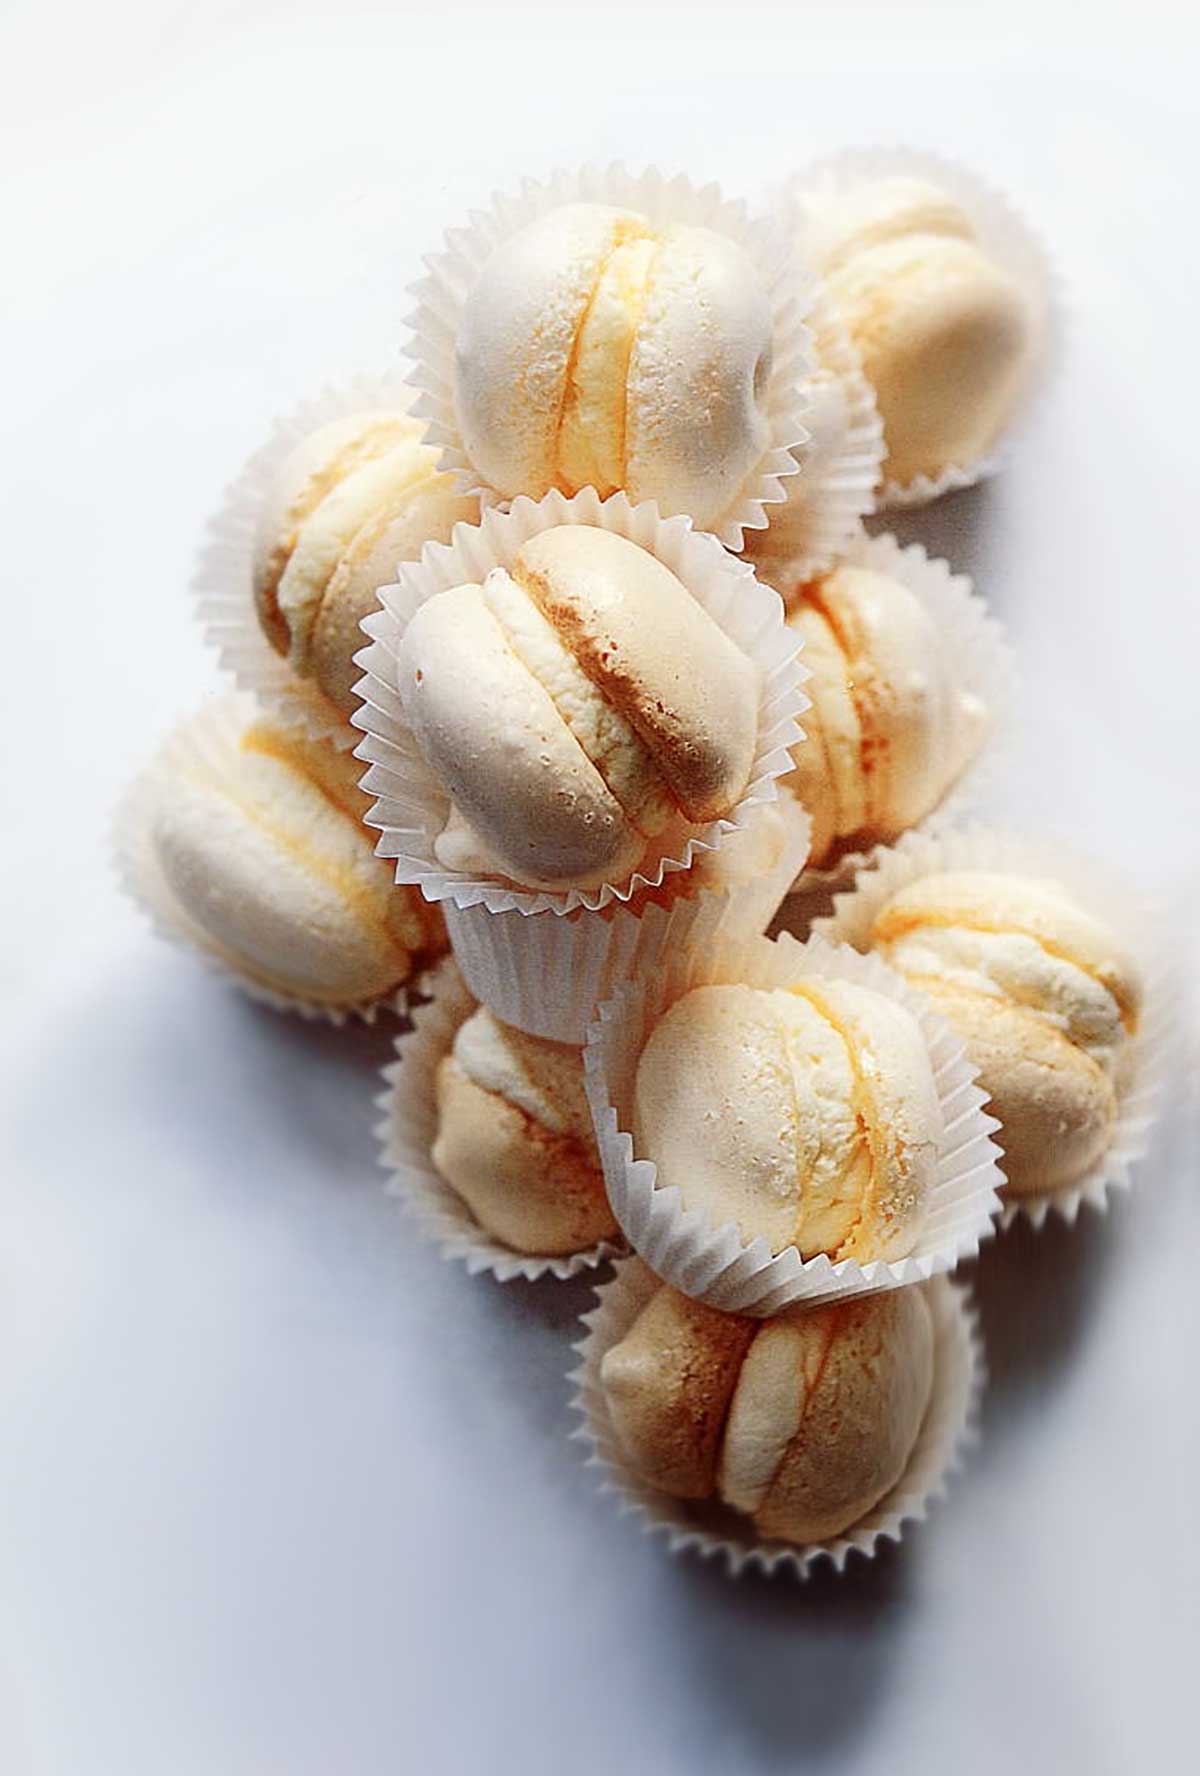 A pile of cream-filled macarons, each in a white wrapper.